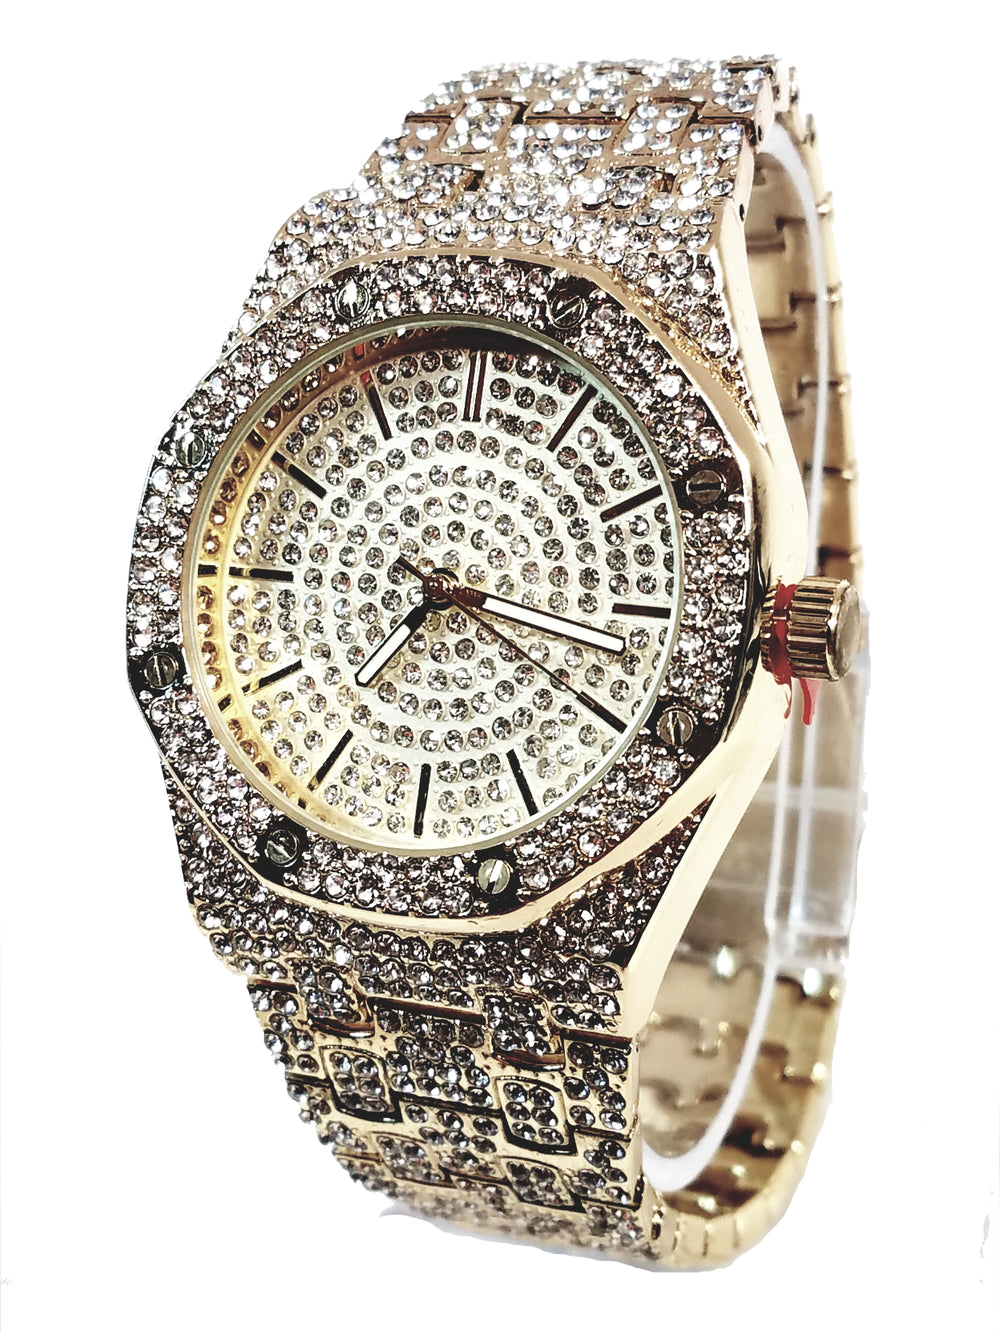 Techno Pave Gold Finish Iced Out Lab Diamond Iced Round Face Mens Watch Metal Iced Band Bling 8651